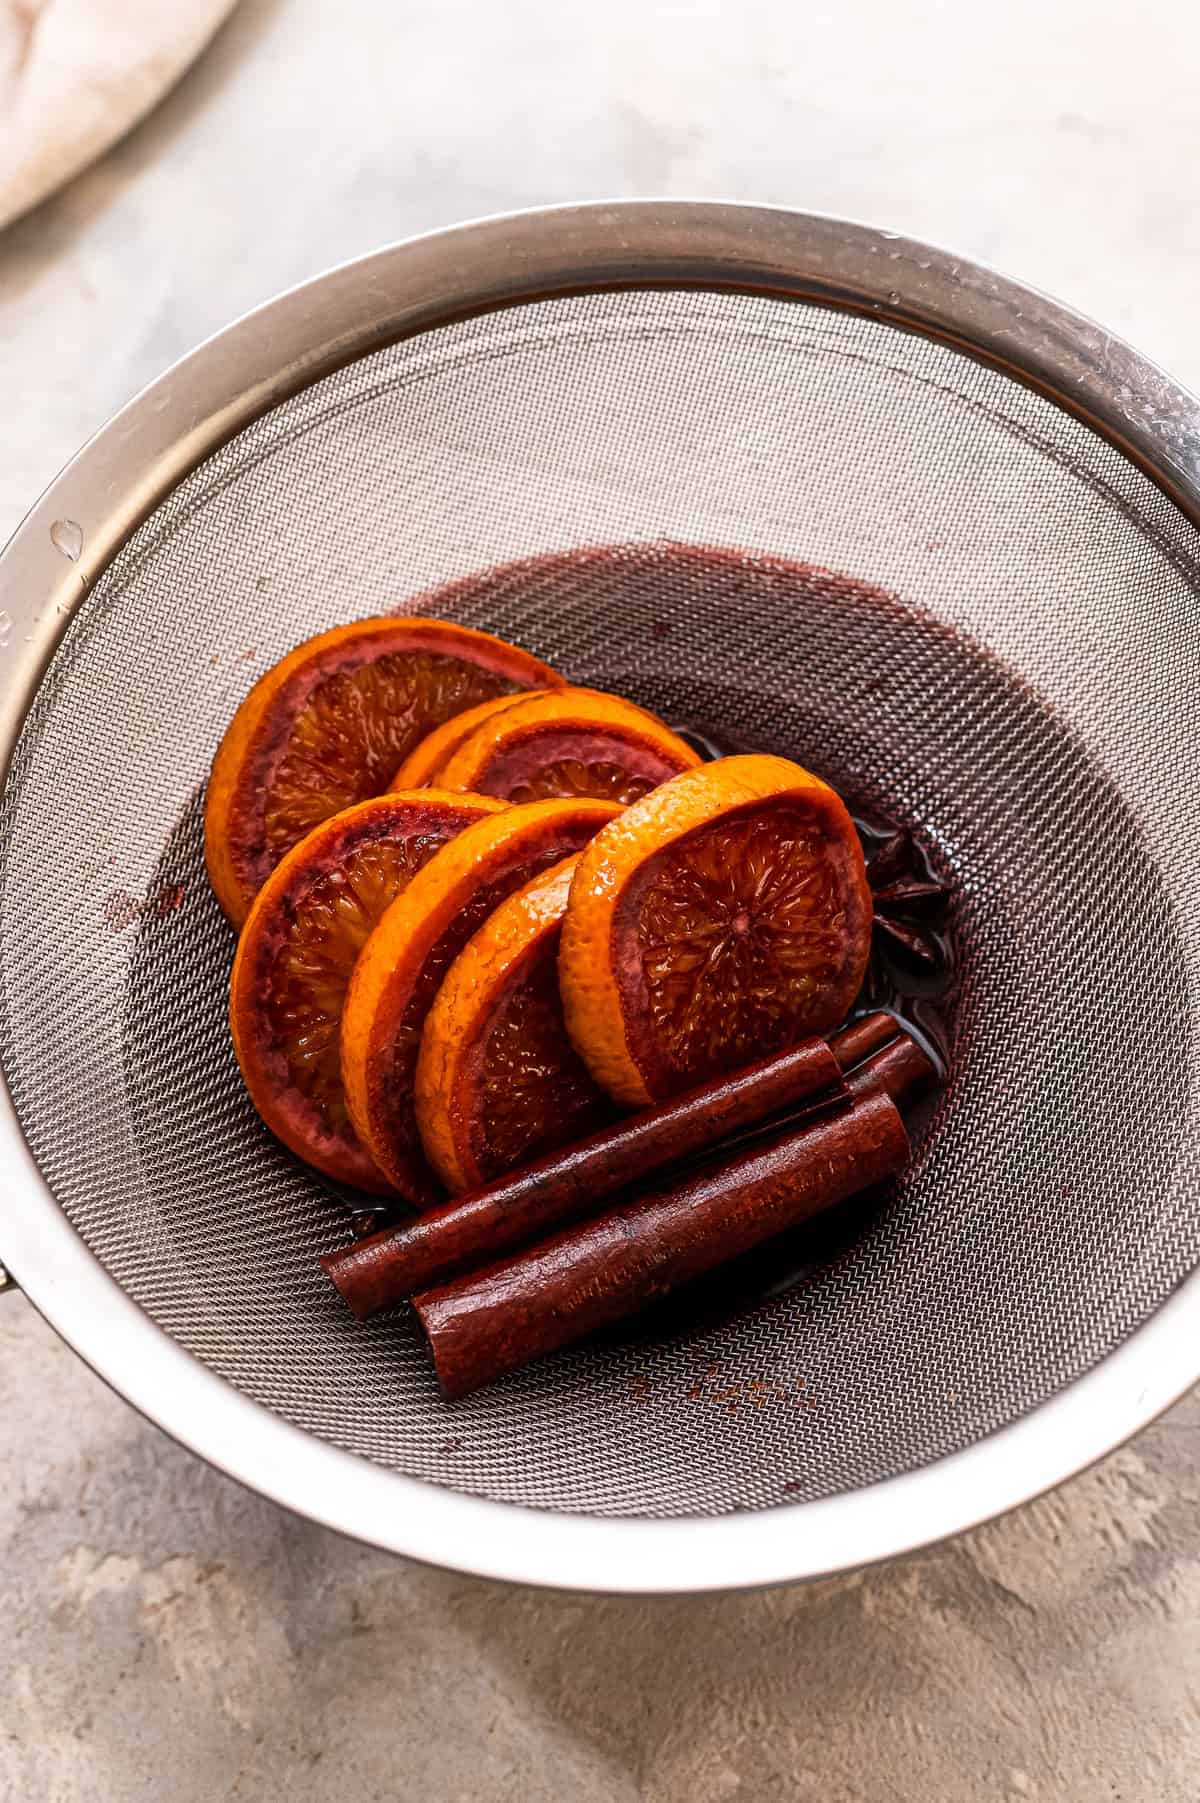 Straining mulled wine with mesh strainer